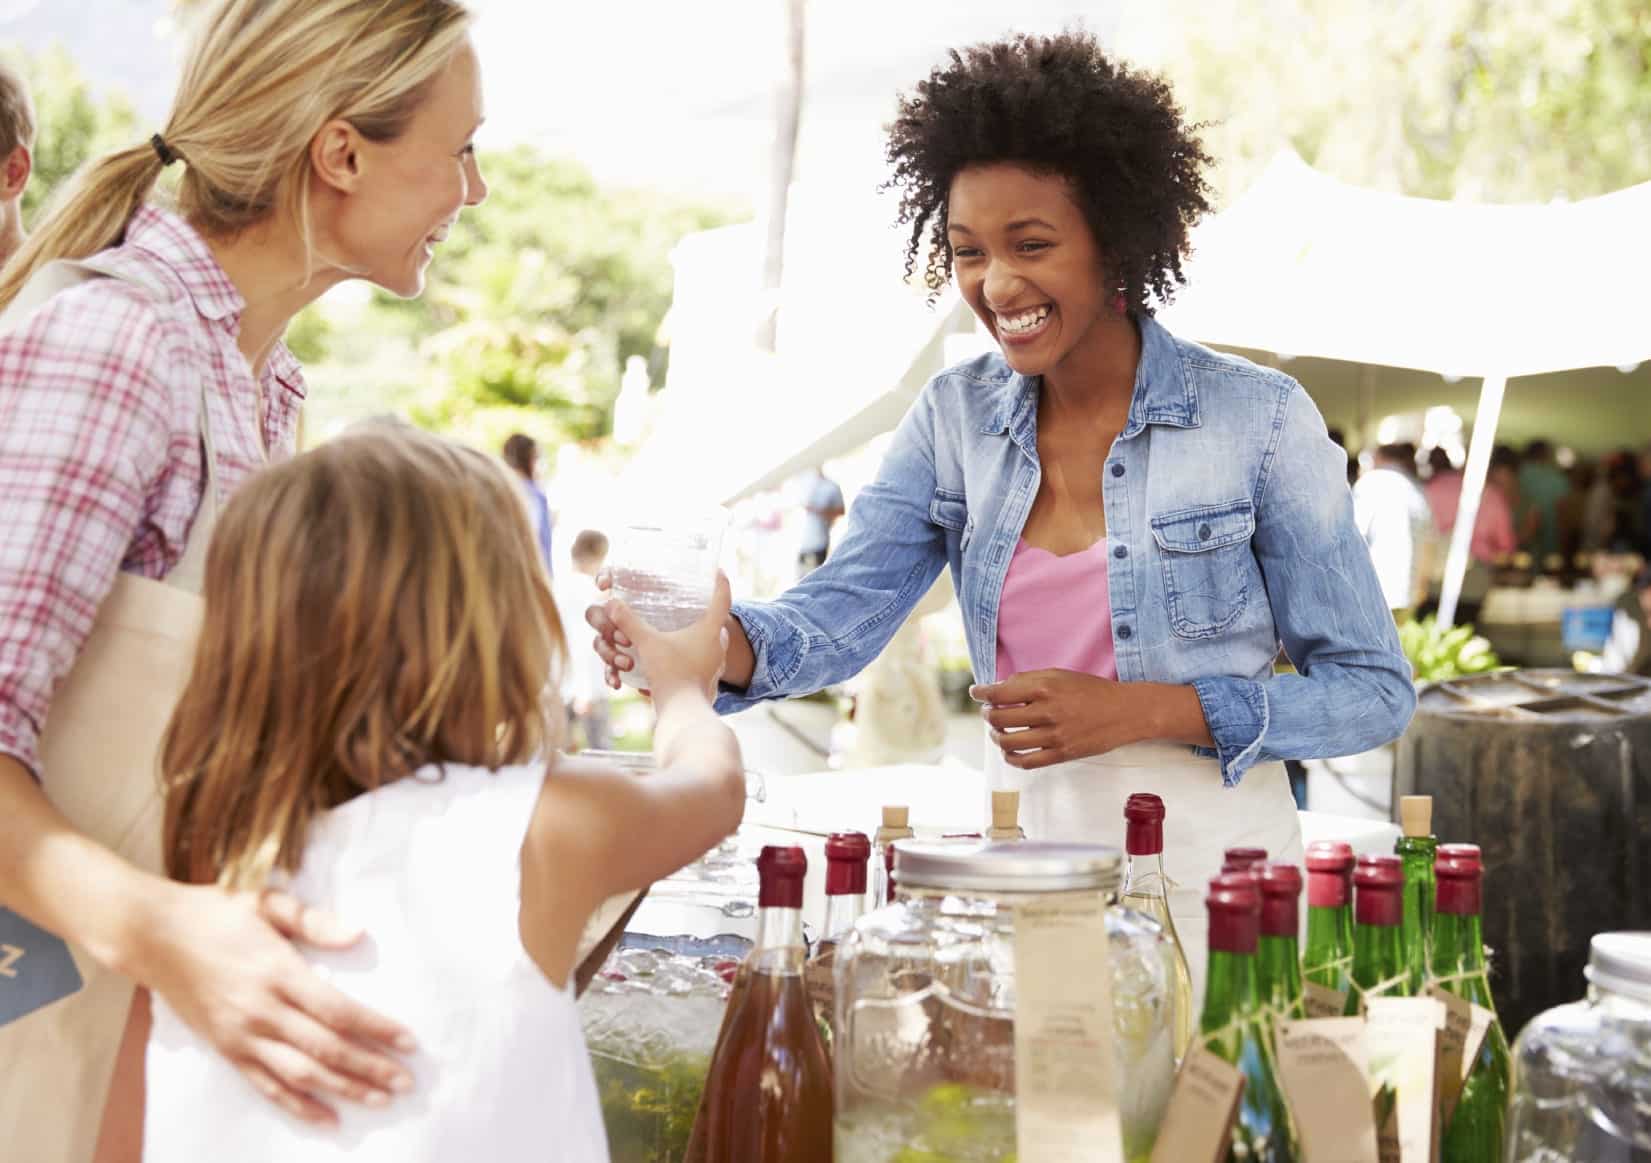 3 Easy Ways Your Small Business Can Give Back to the Community